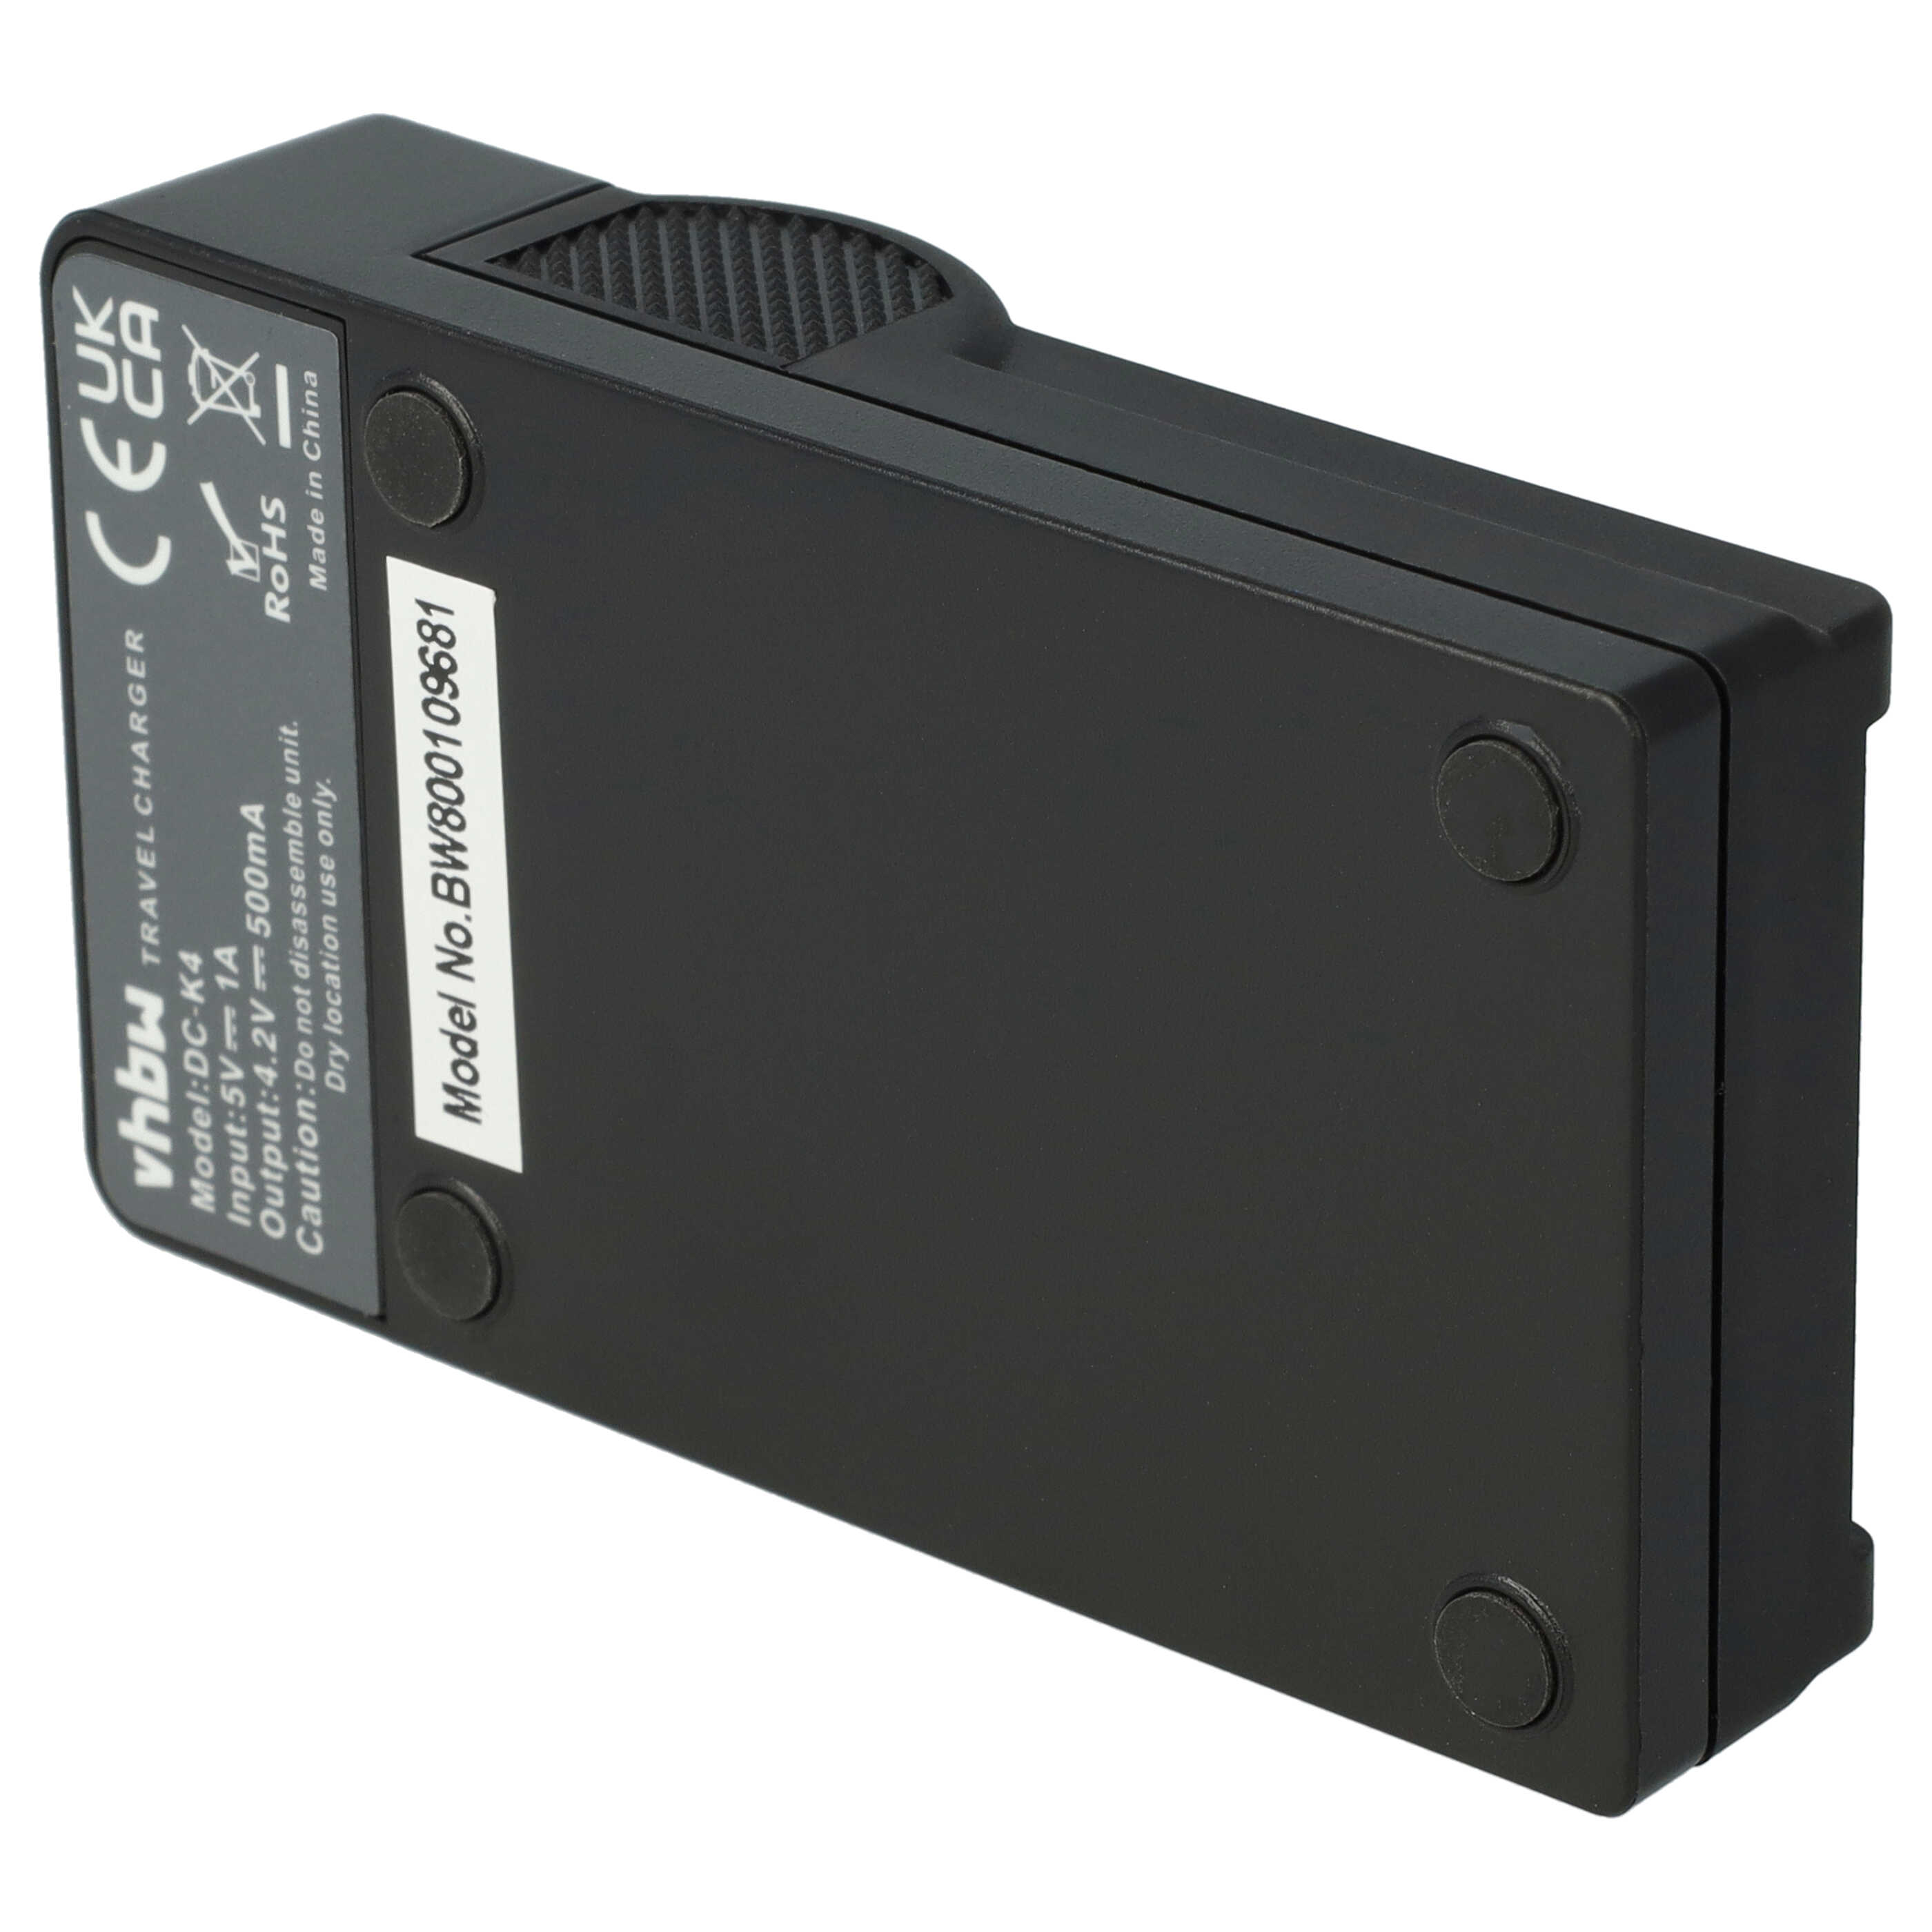 Battery Charger suitable for BeoPlay H7 Camera etc. - 0.5 A, 4.2 V